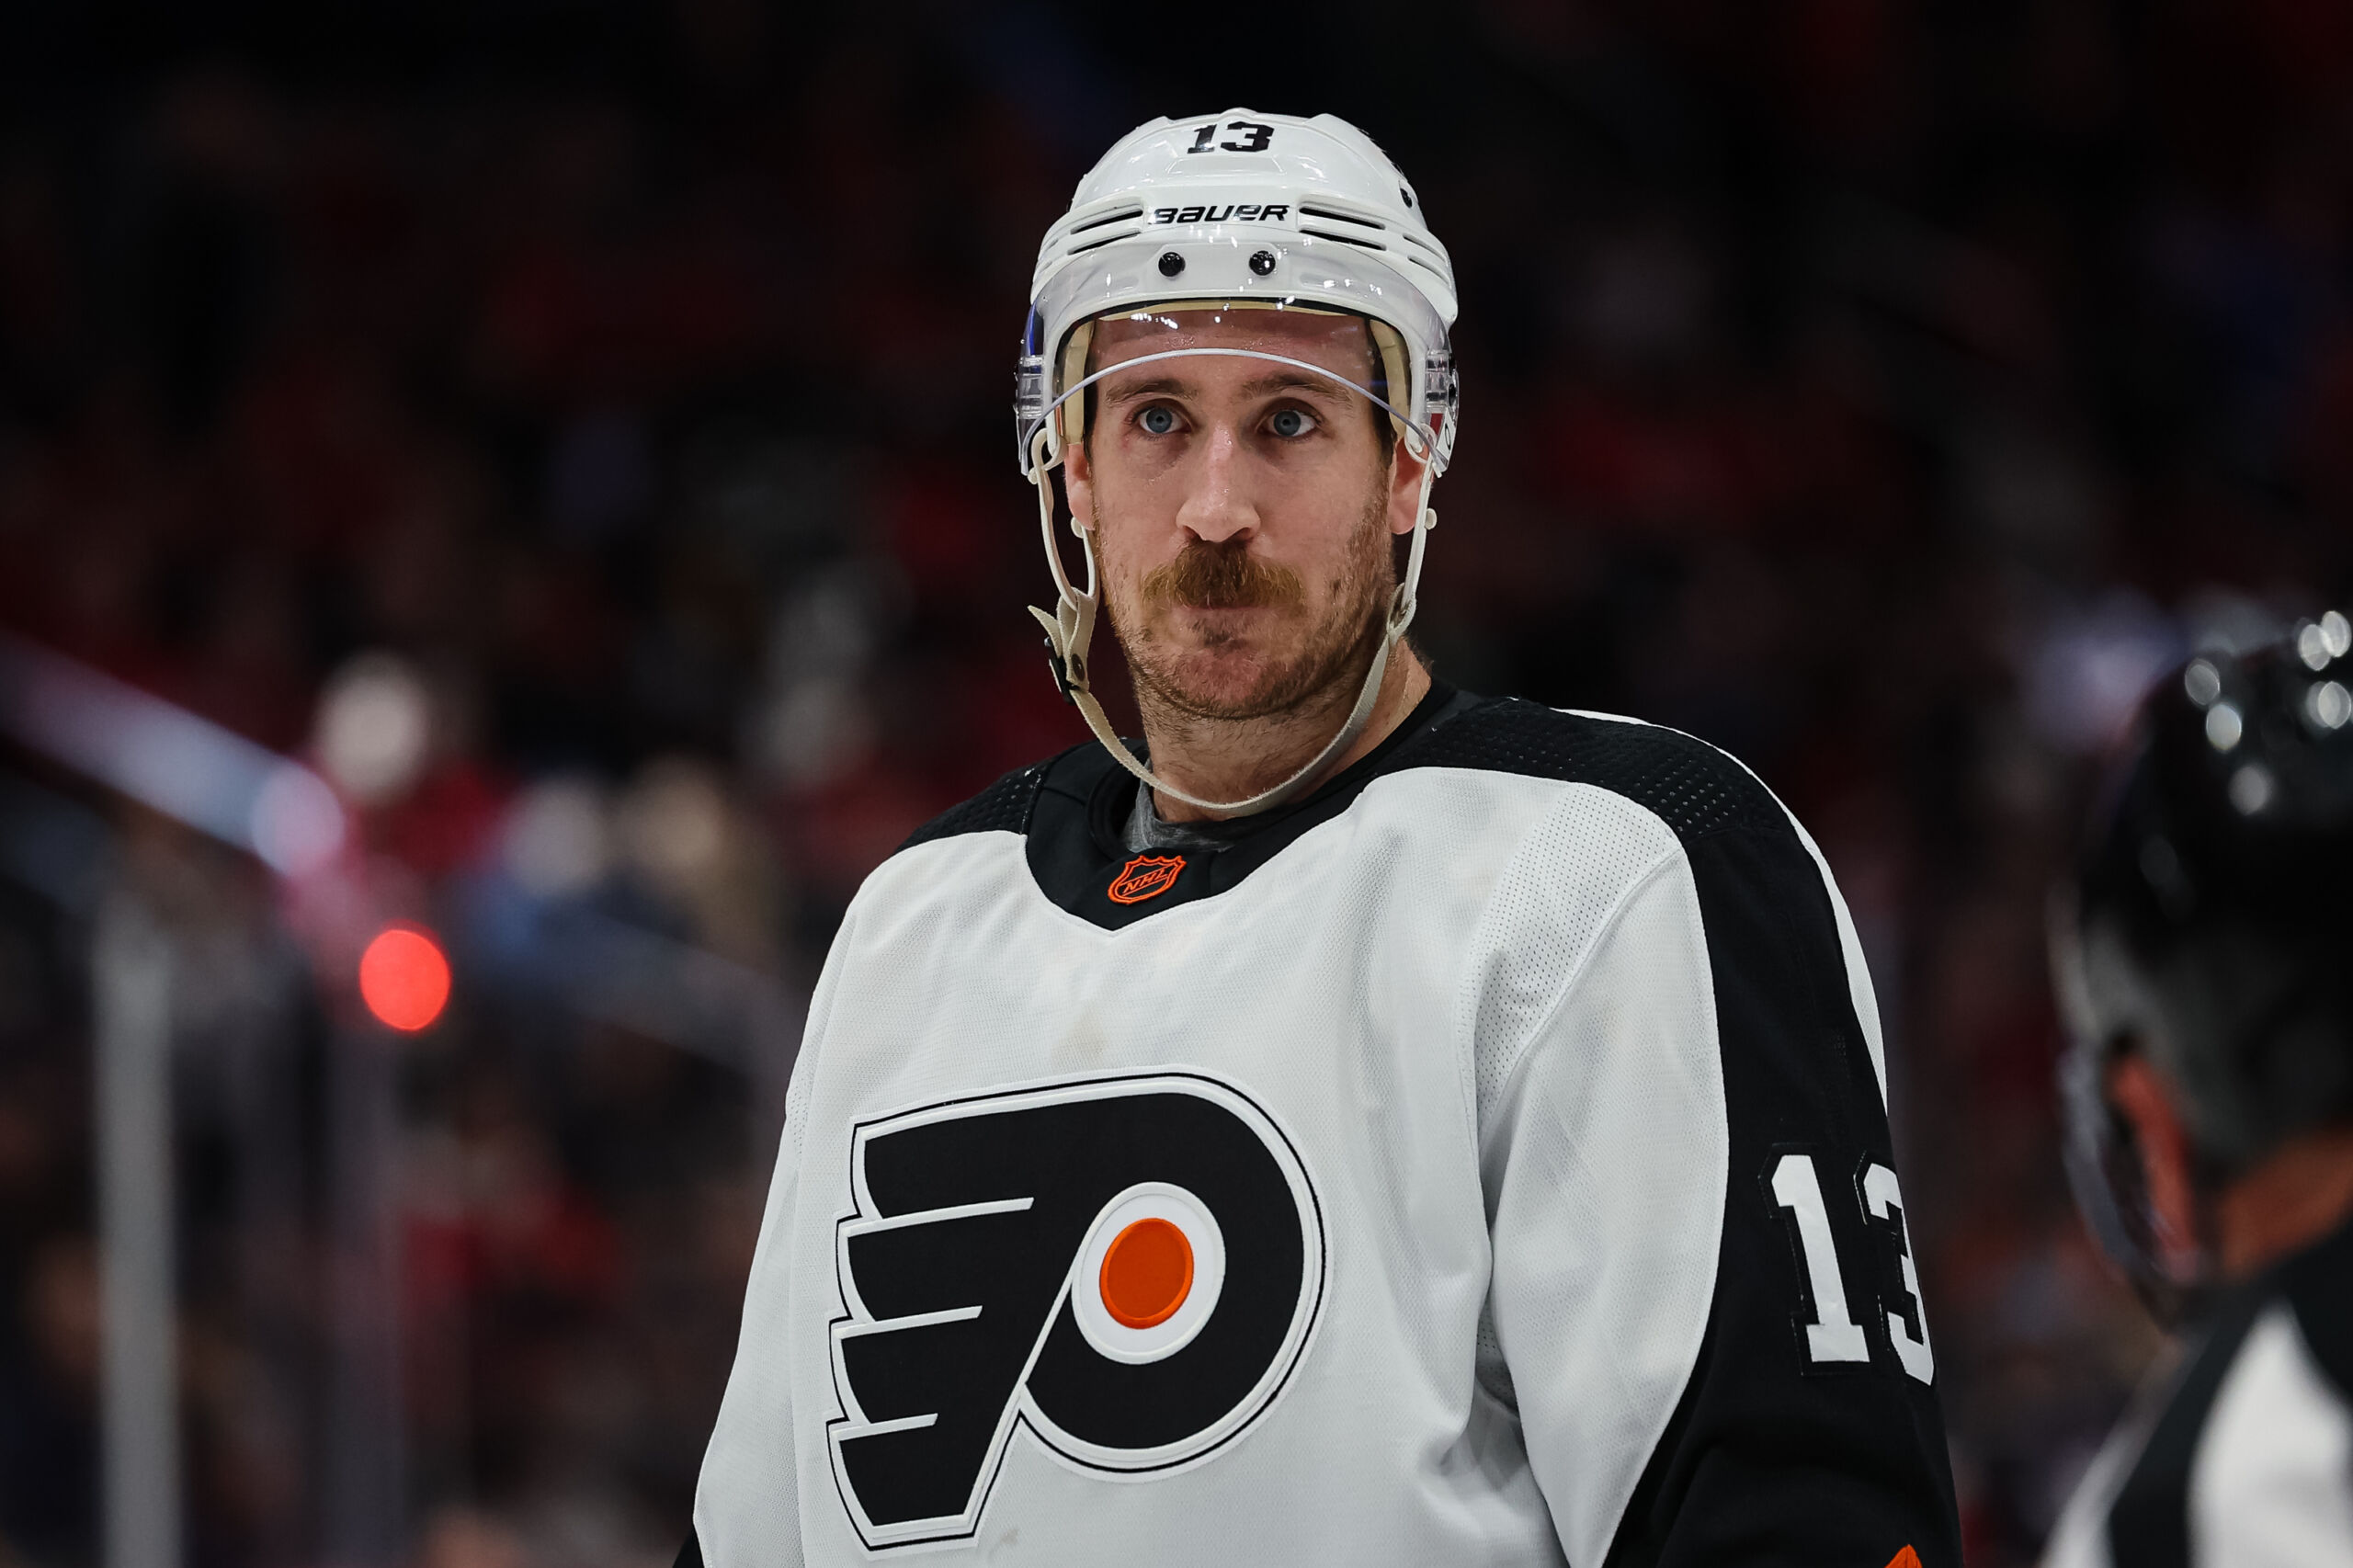 Offseason trade? Kevin Hayes 'picked up the message' from Flyers